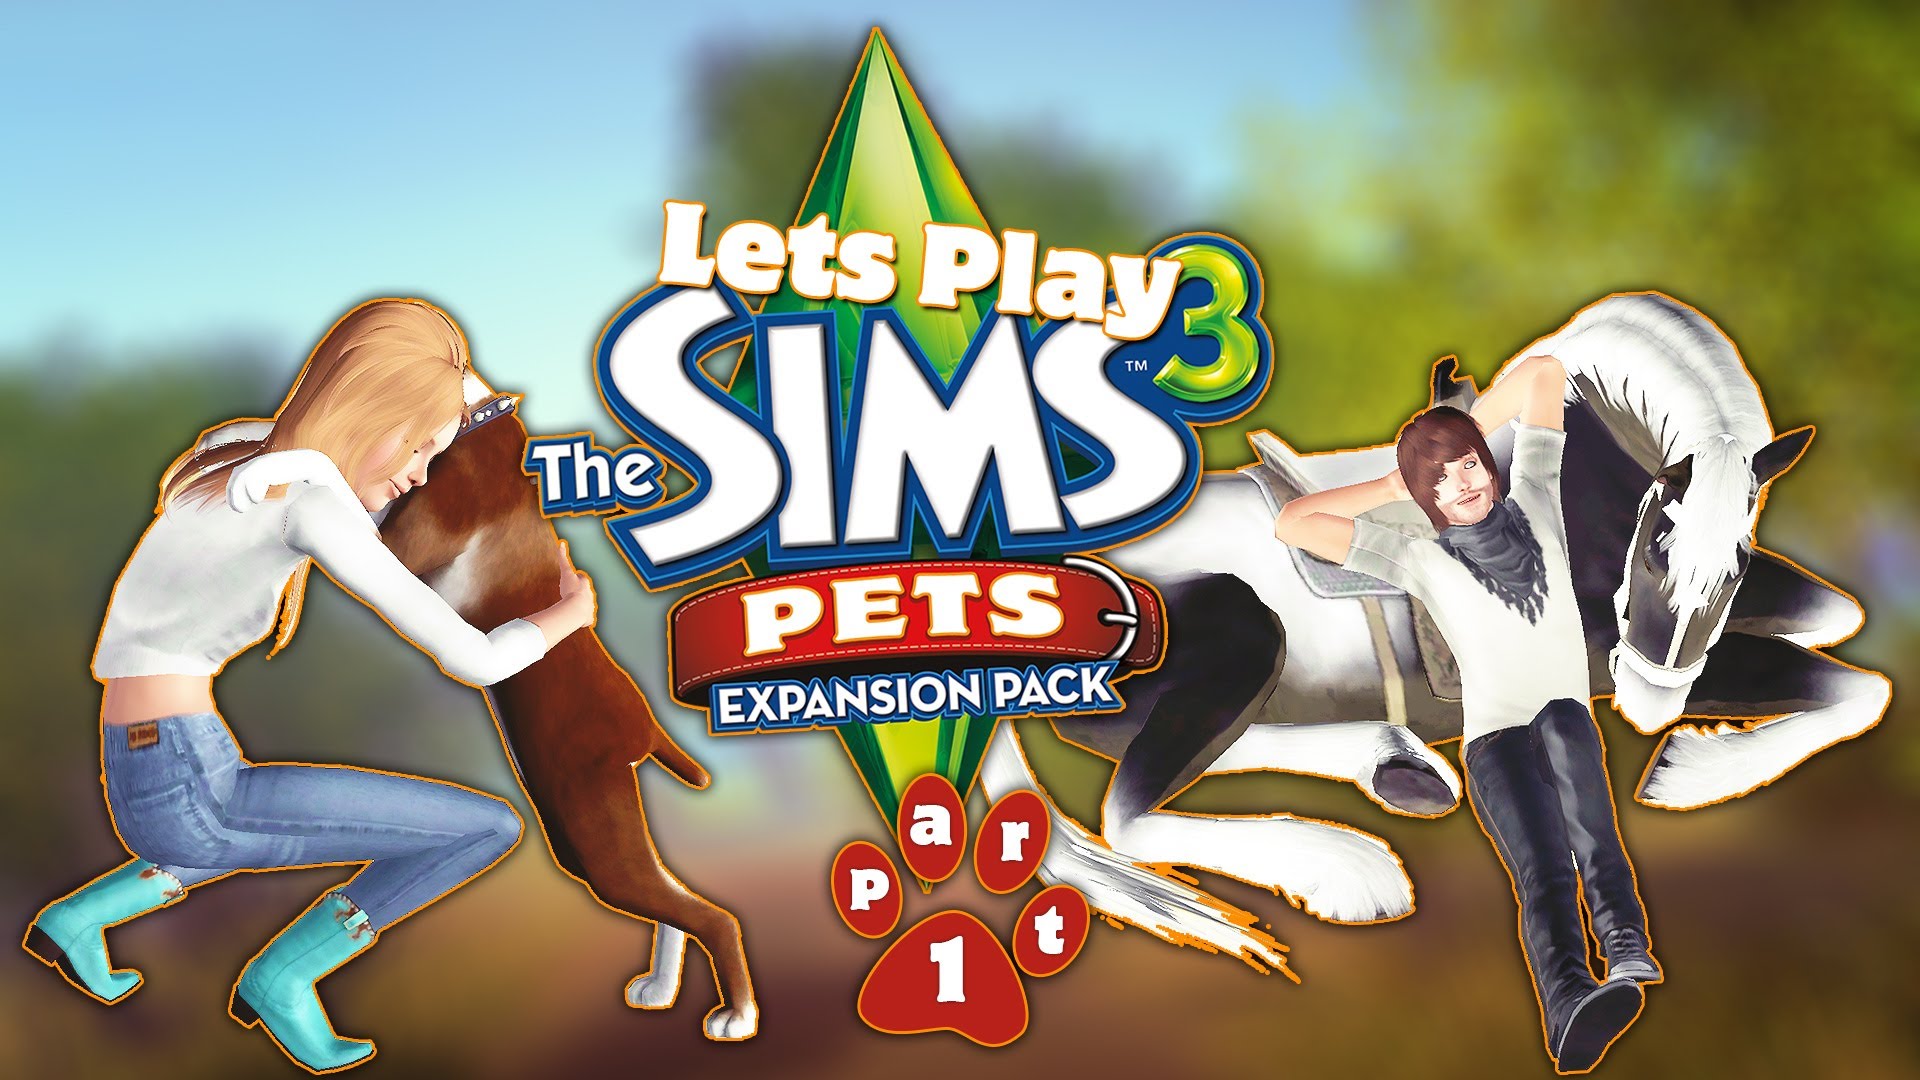 The Sims 3 Pets – PC